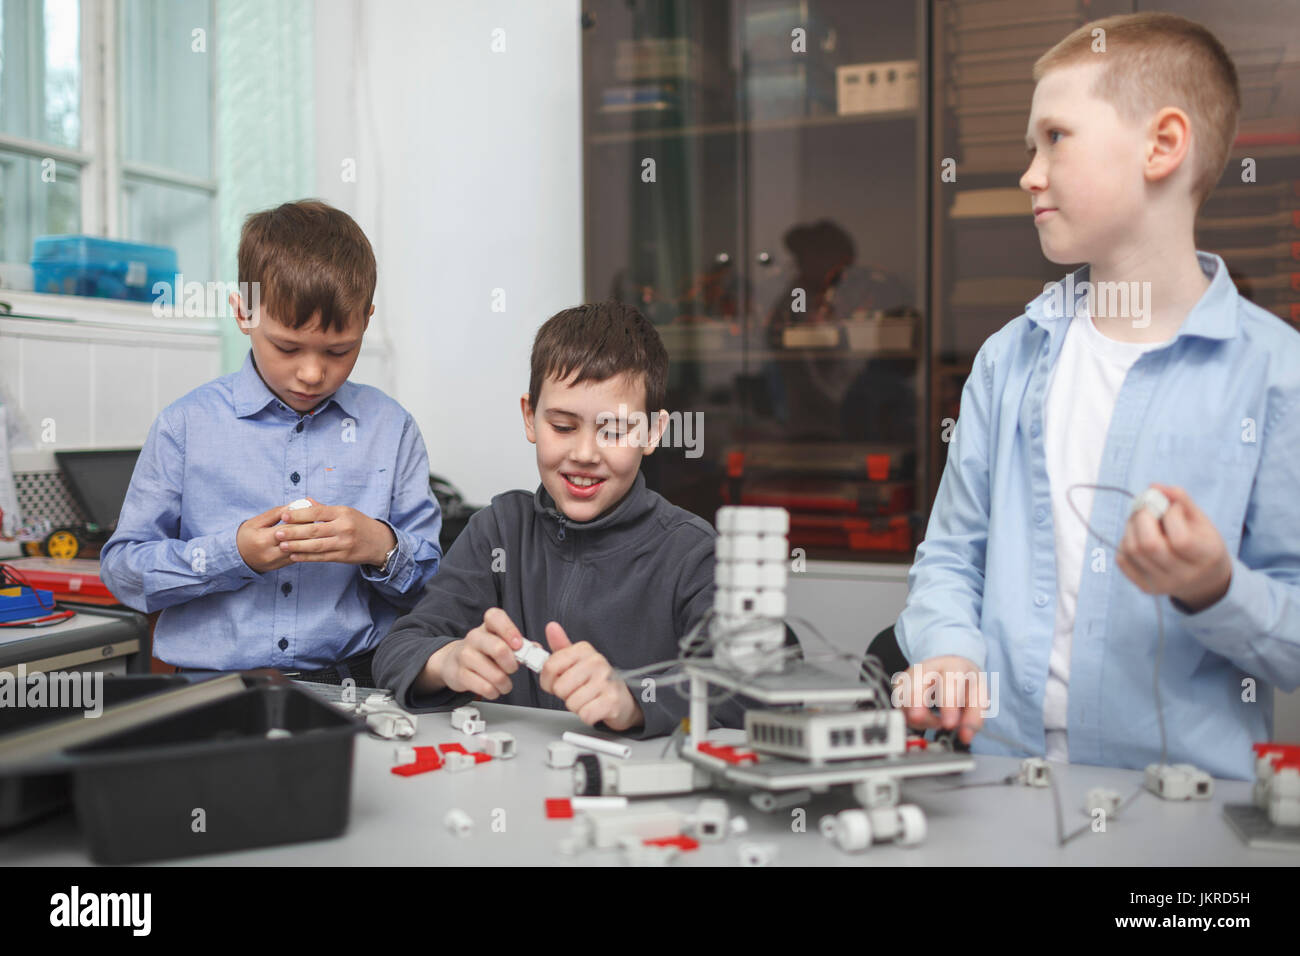 Smiling students working on machine part at table in classroom Stock Photo